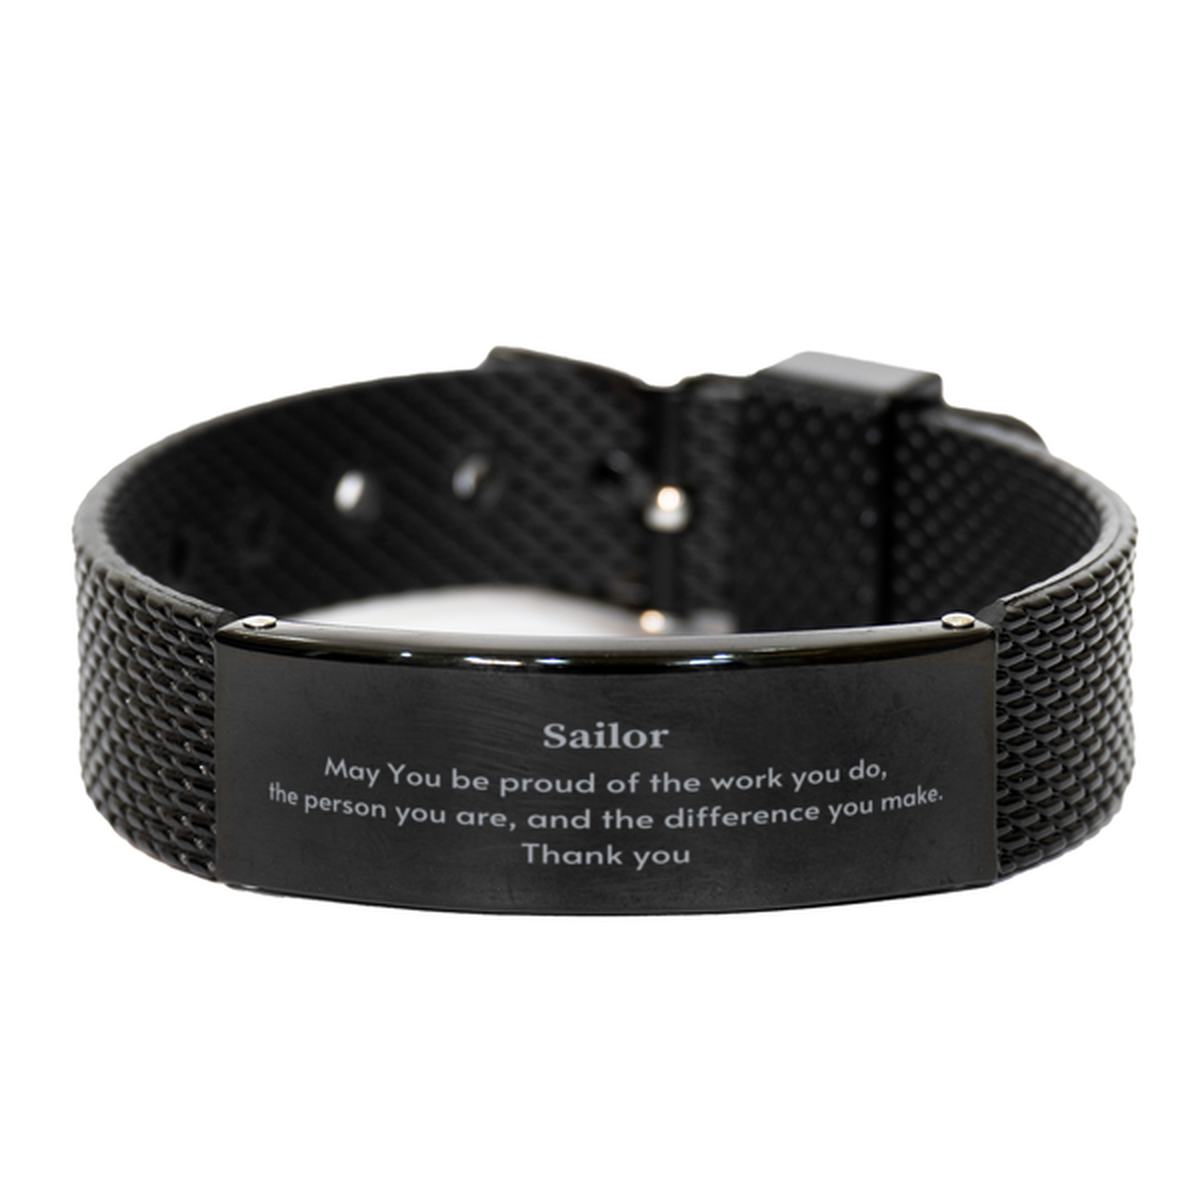 Heartwarming Black Shark Mesh Bracelet Retirement Coworkers Gifts for Sailor, Sailor May You be proud of the work you do, the person you are Gifts for Boss Men Women Friends